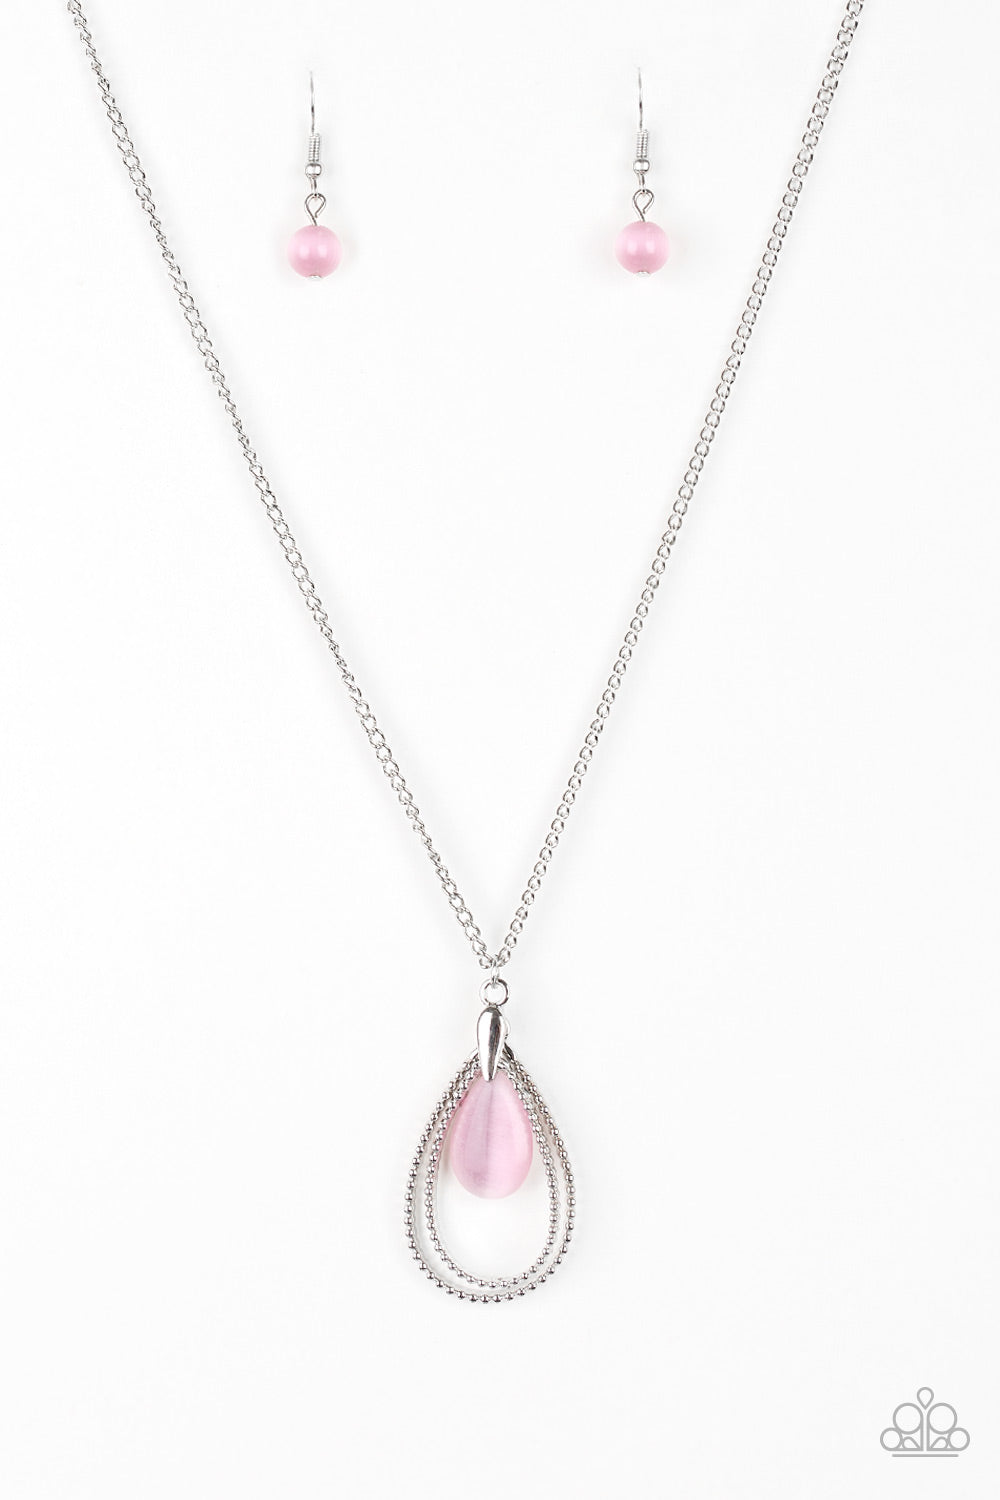 Teardrop Tranquility - Pink Necklace